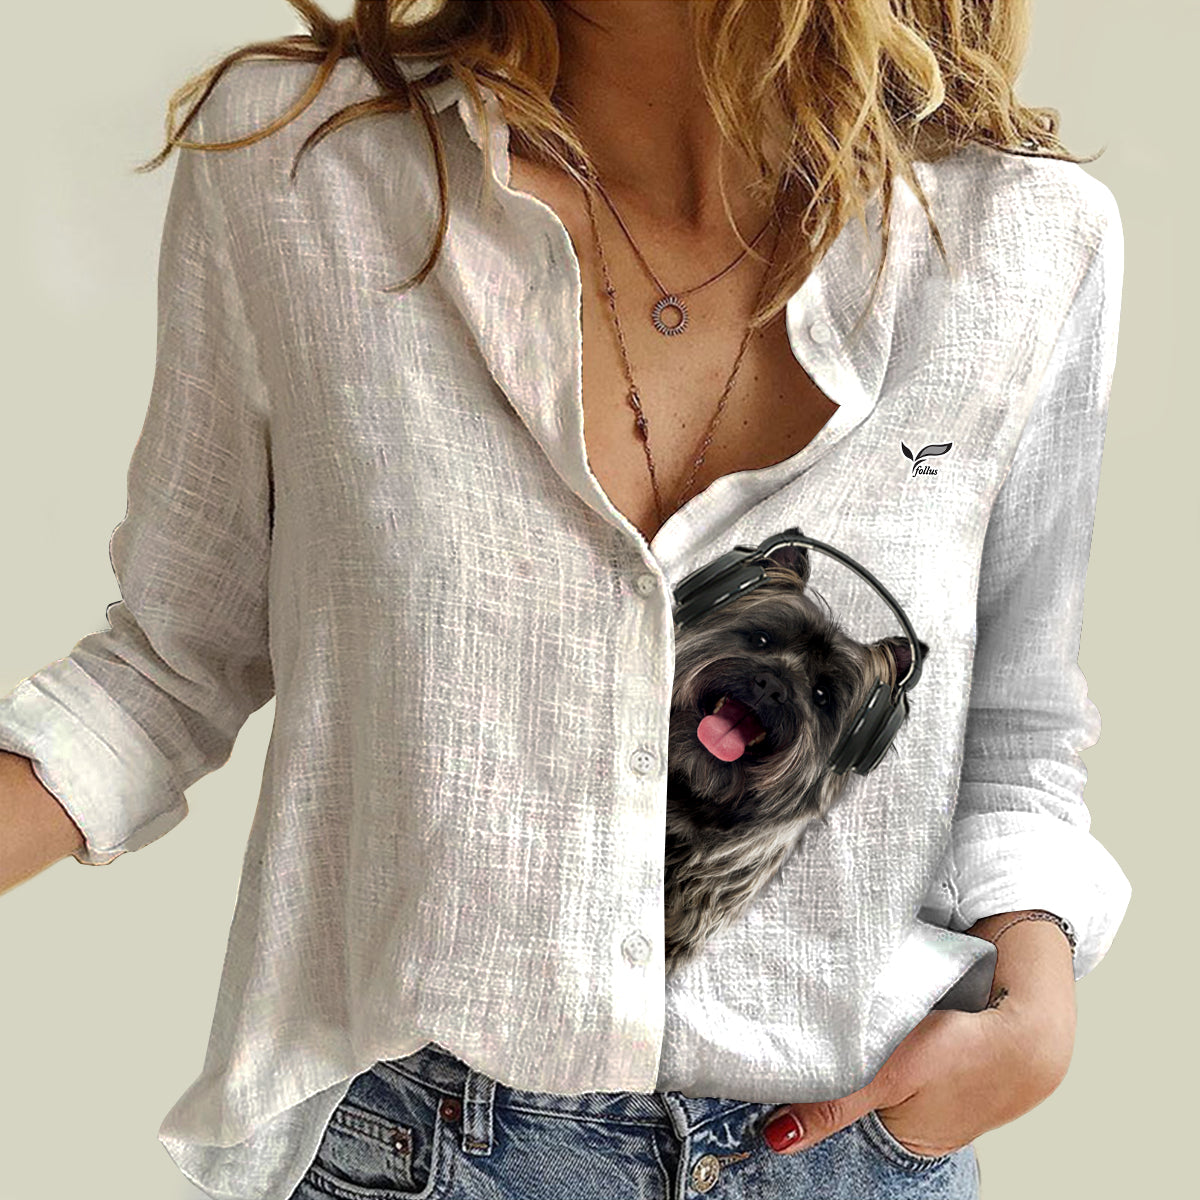 Great Music With Cairn Terrier - Follus Women's Long-Sleeve Shirt V2